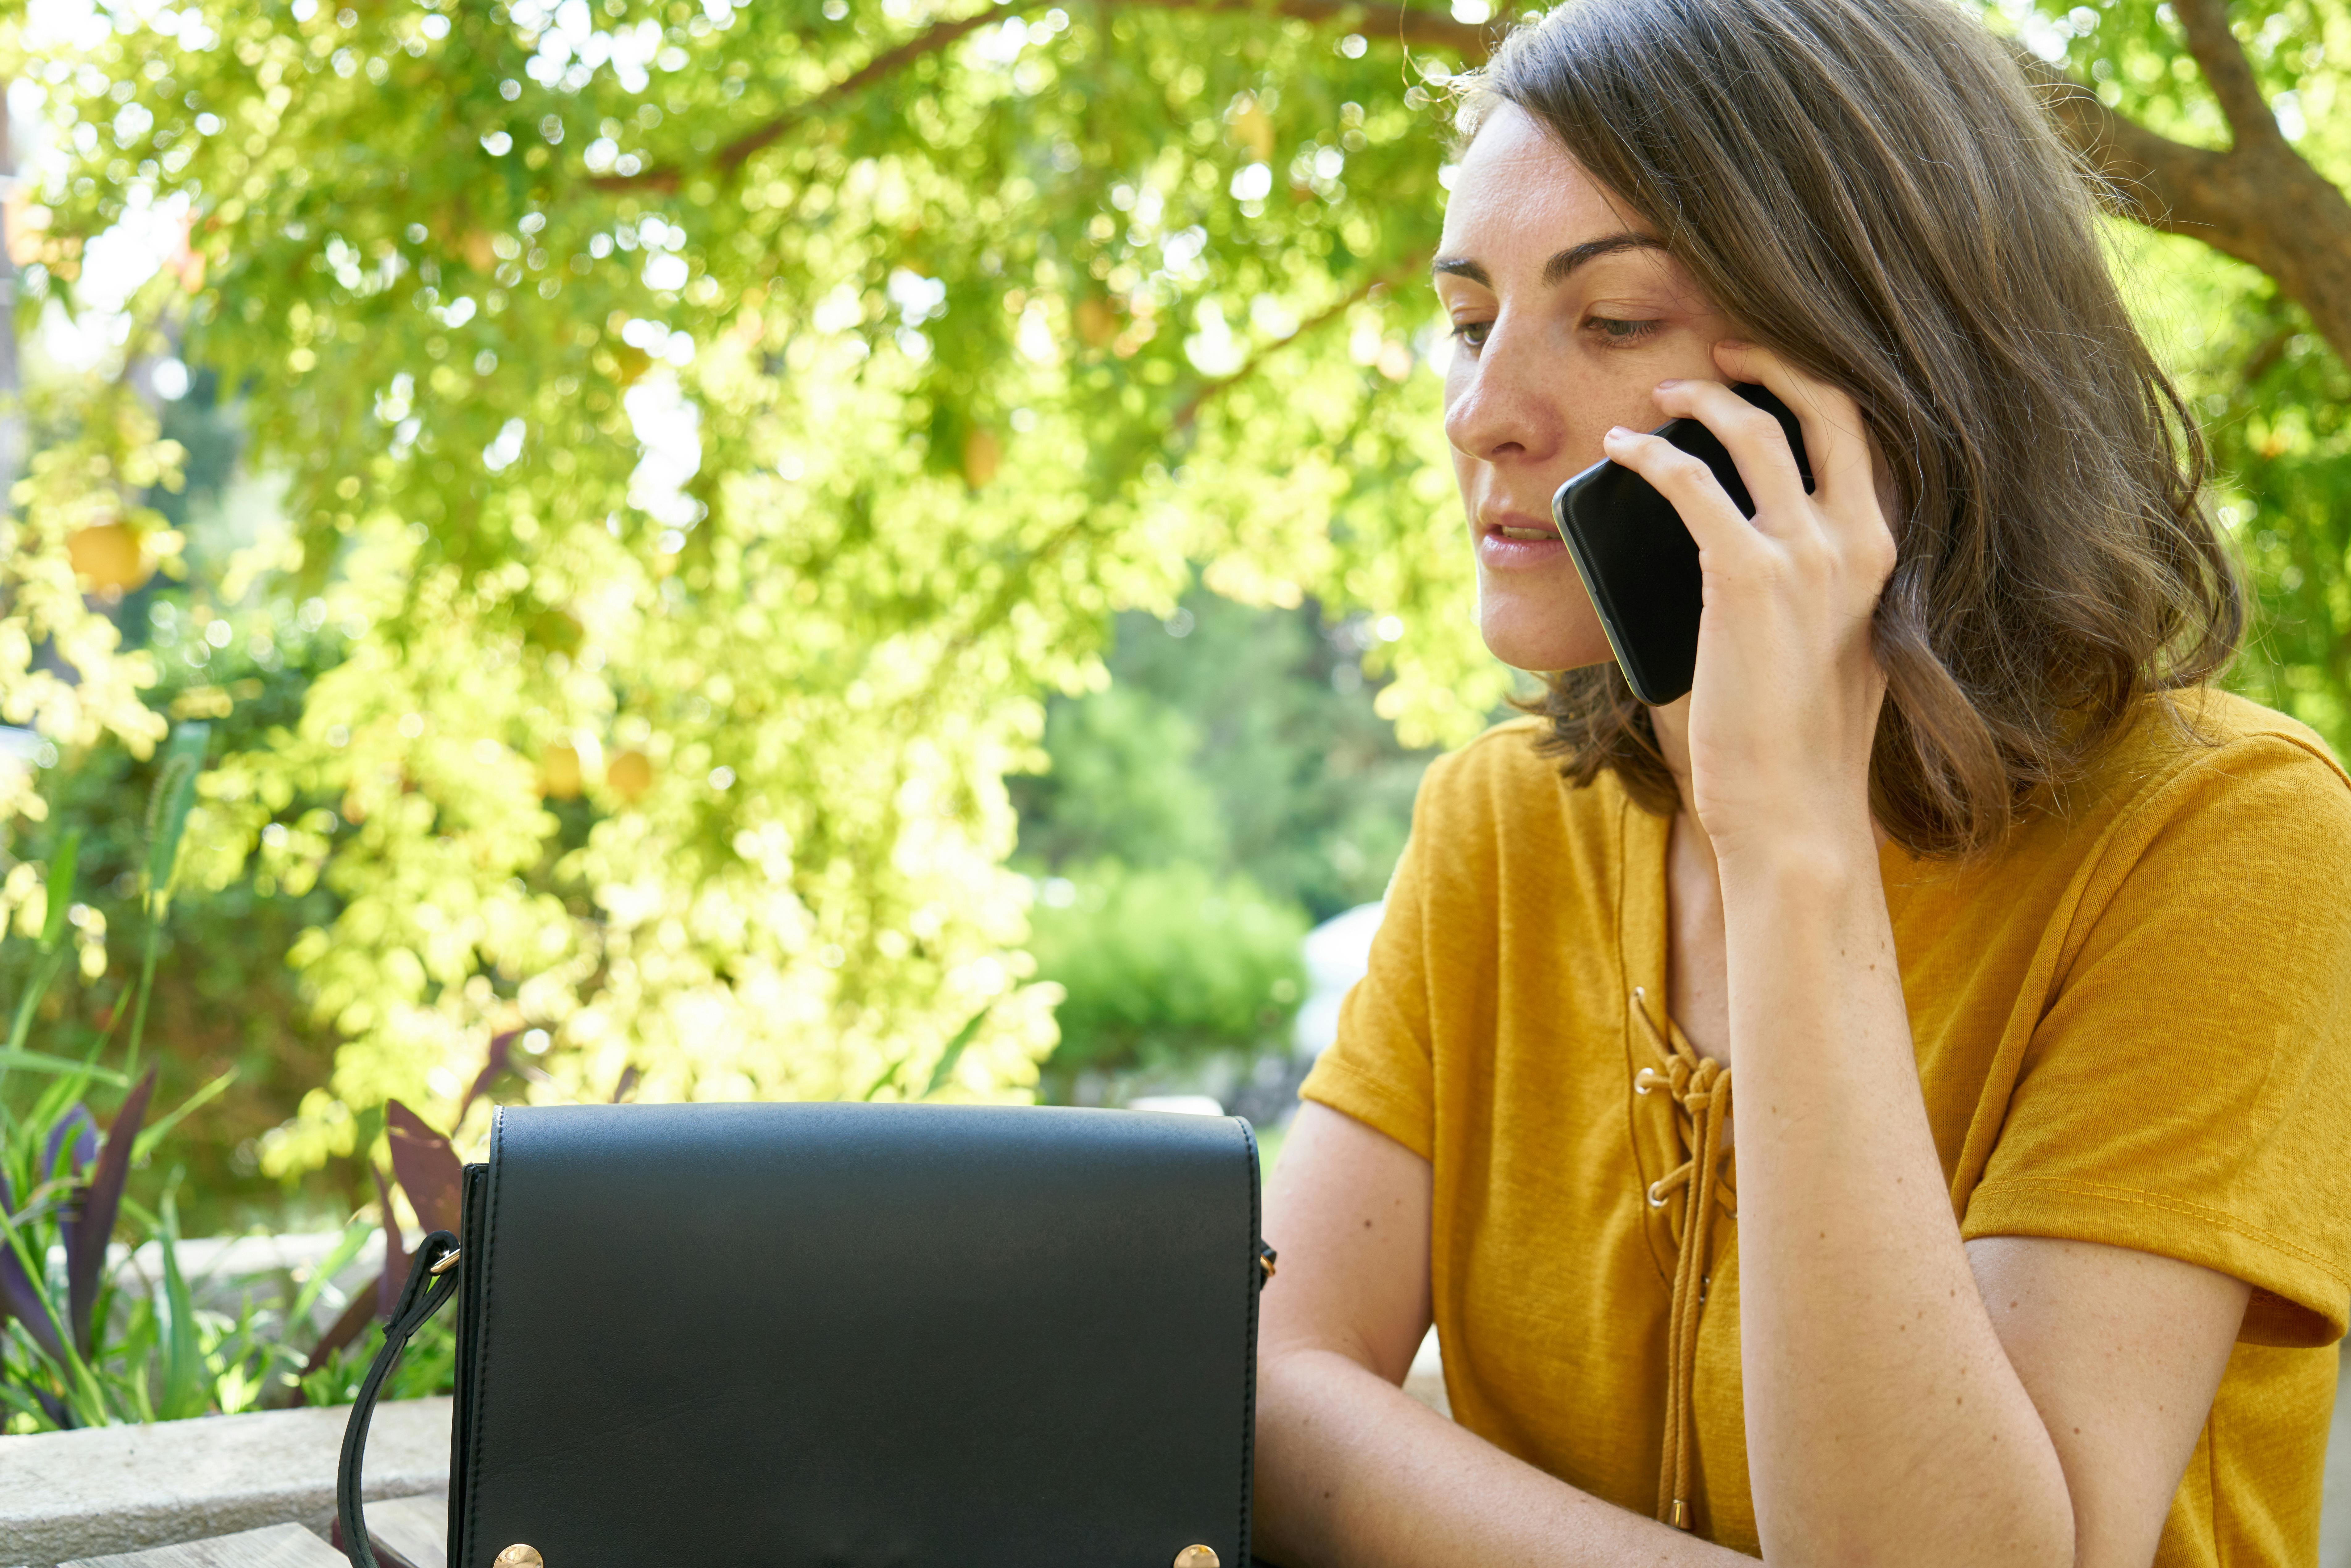 A woman on a call while outside | Source: Pexels